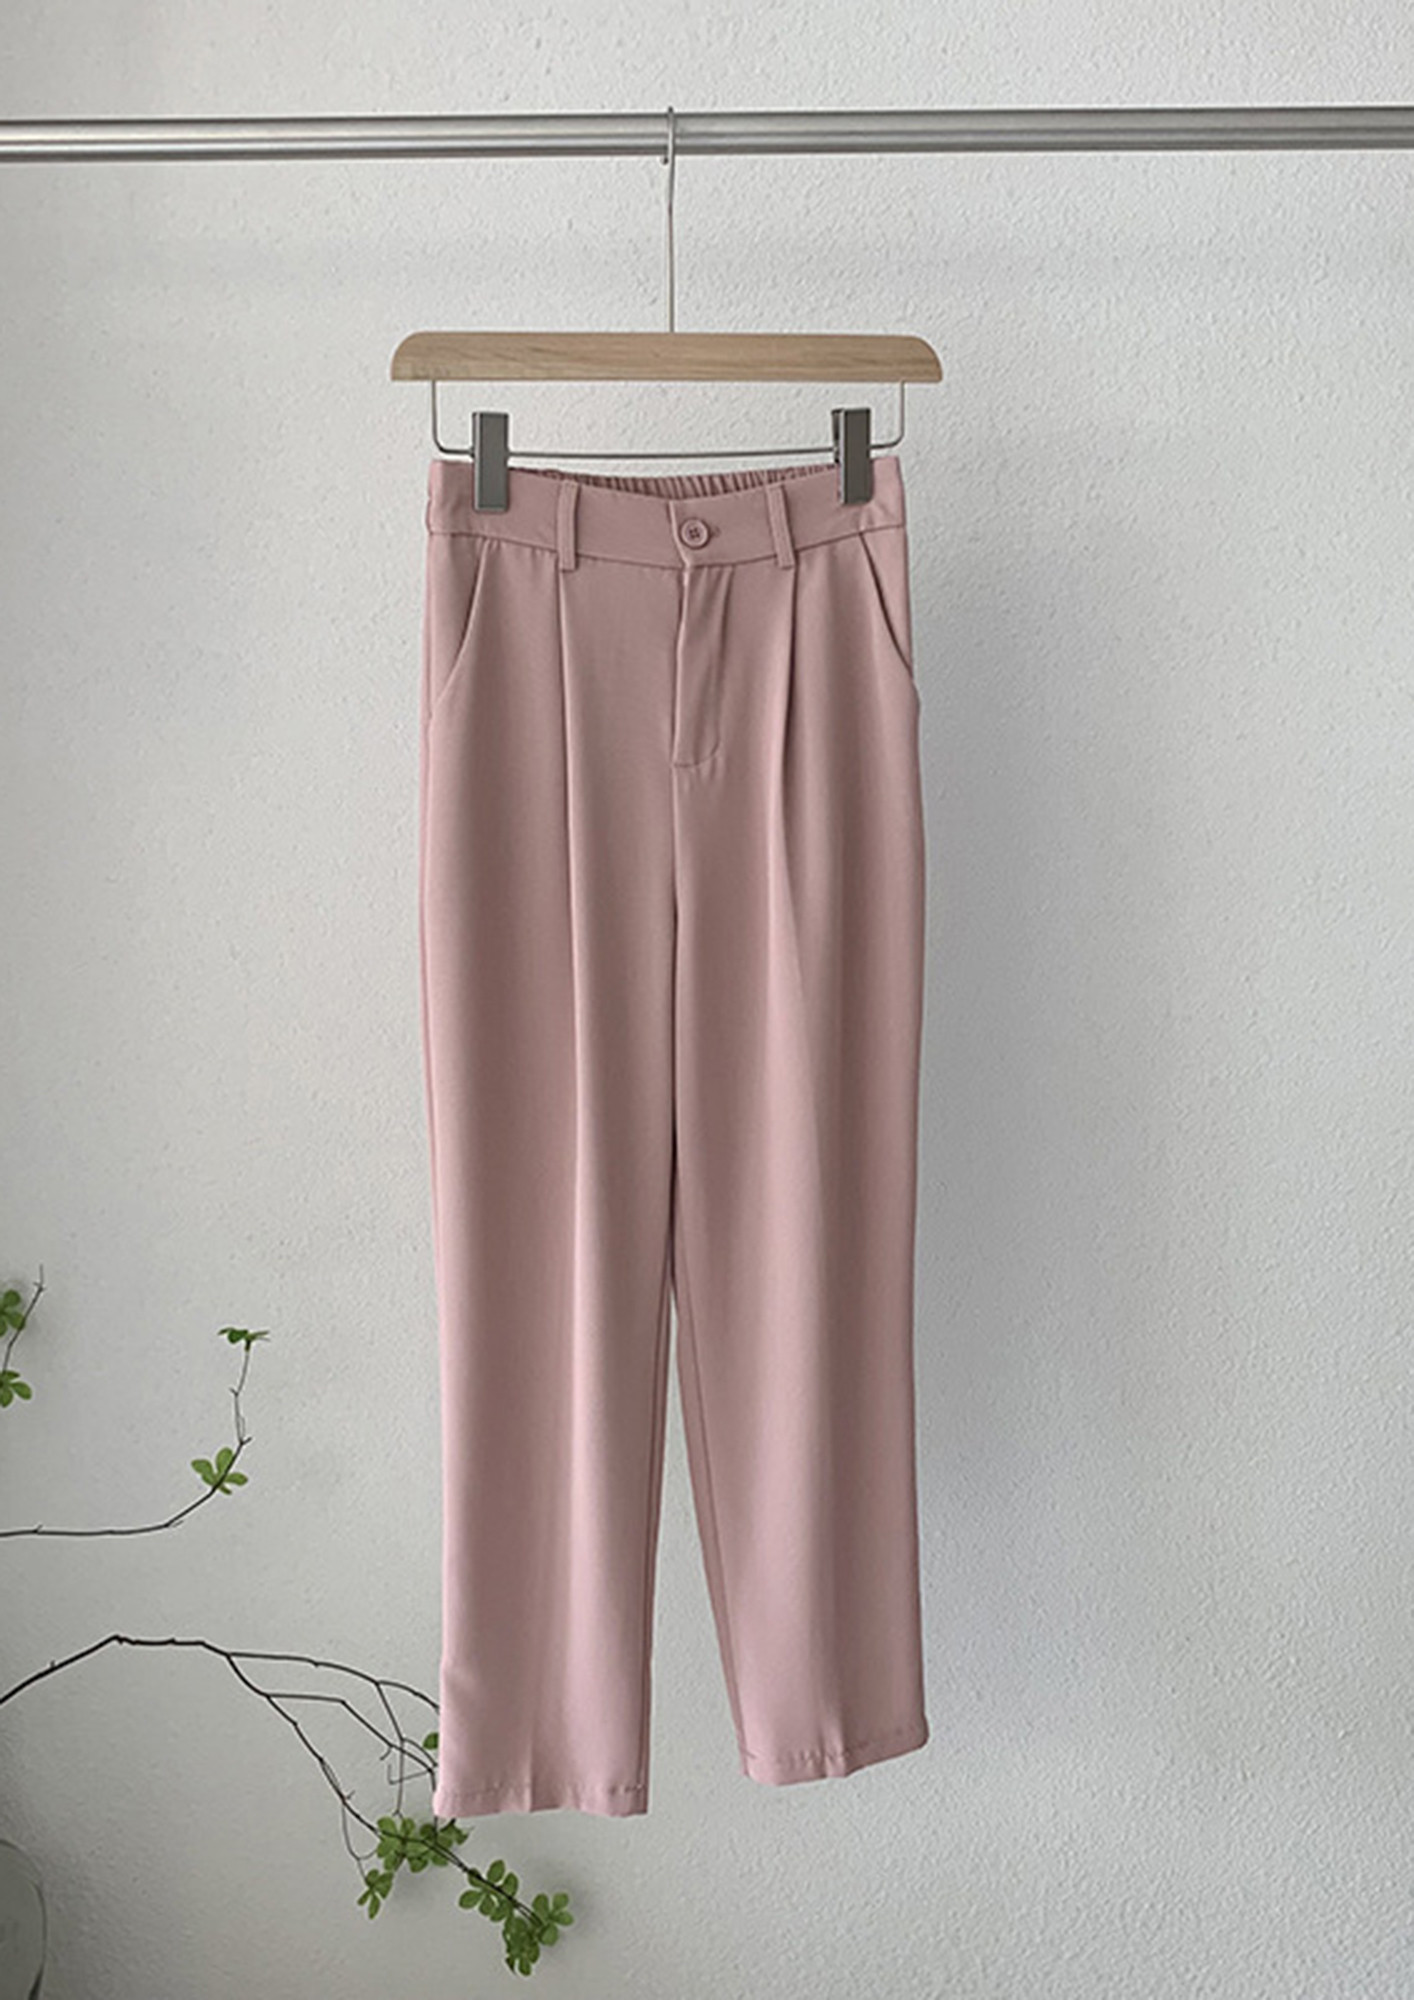 A LEISURE DAY PINK PANTS